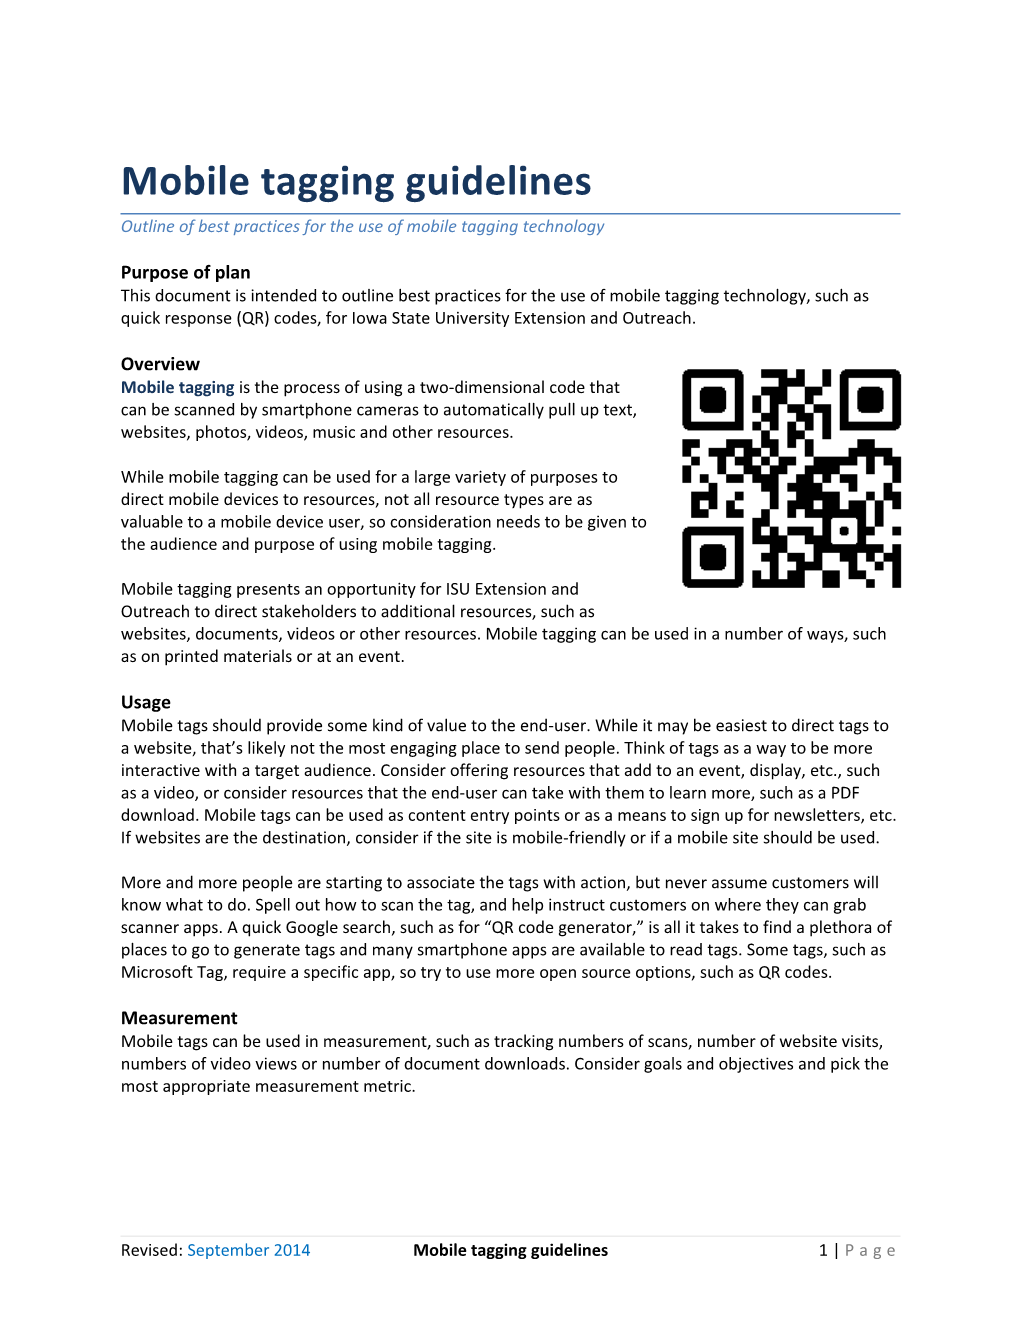 Outline of Best Practices for the Use of Mobile Tagging Technology